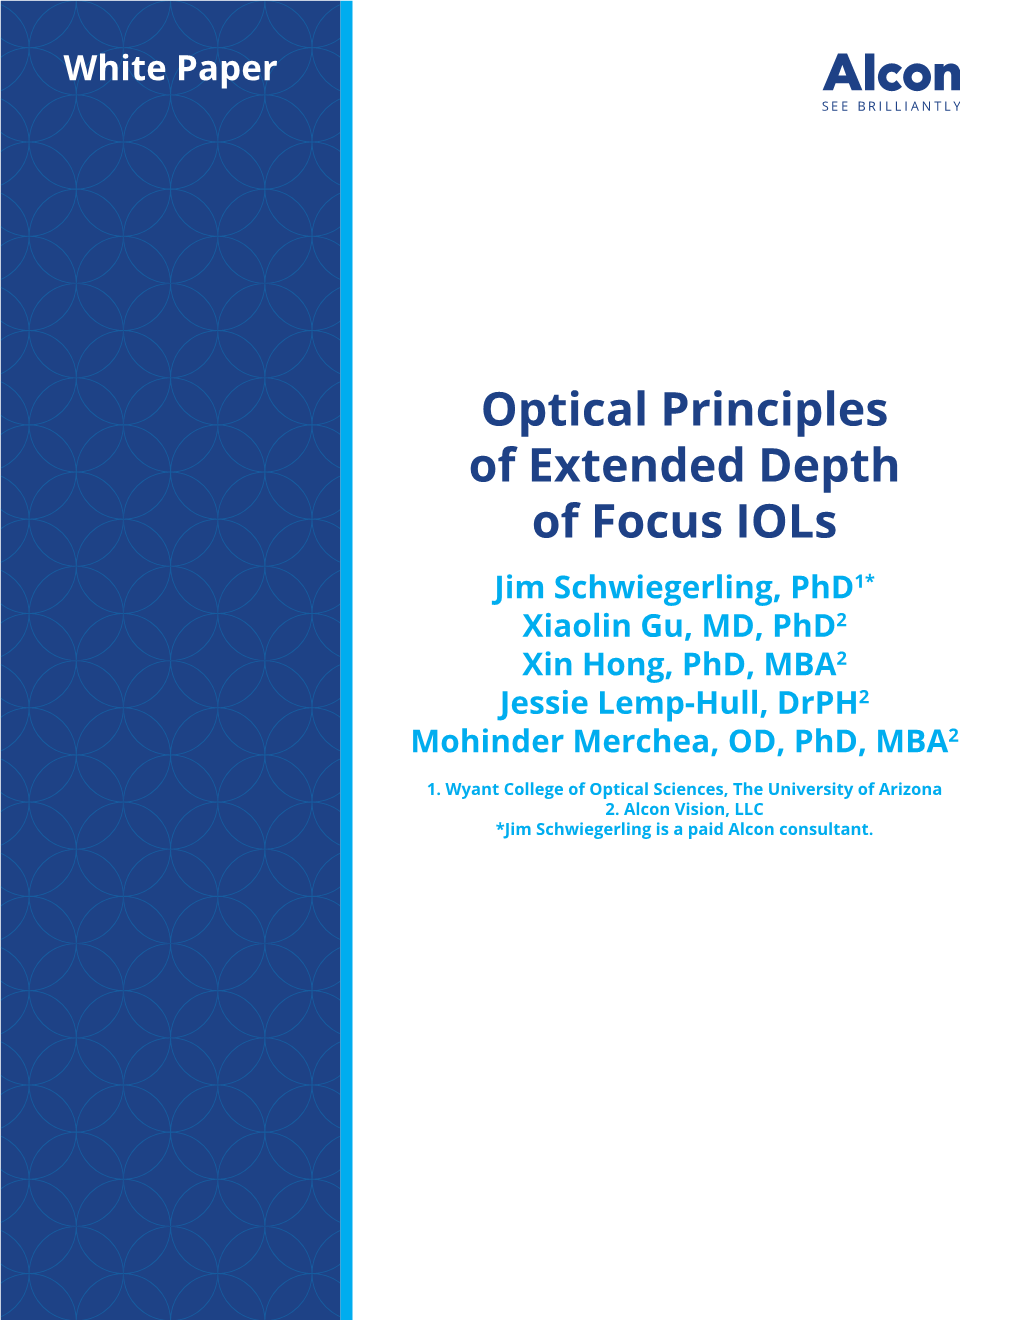 Optical Principles of Extended Depth of Focus Iols